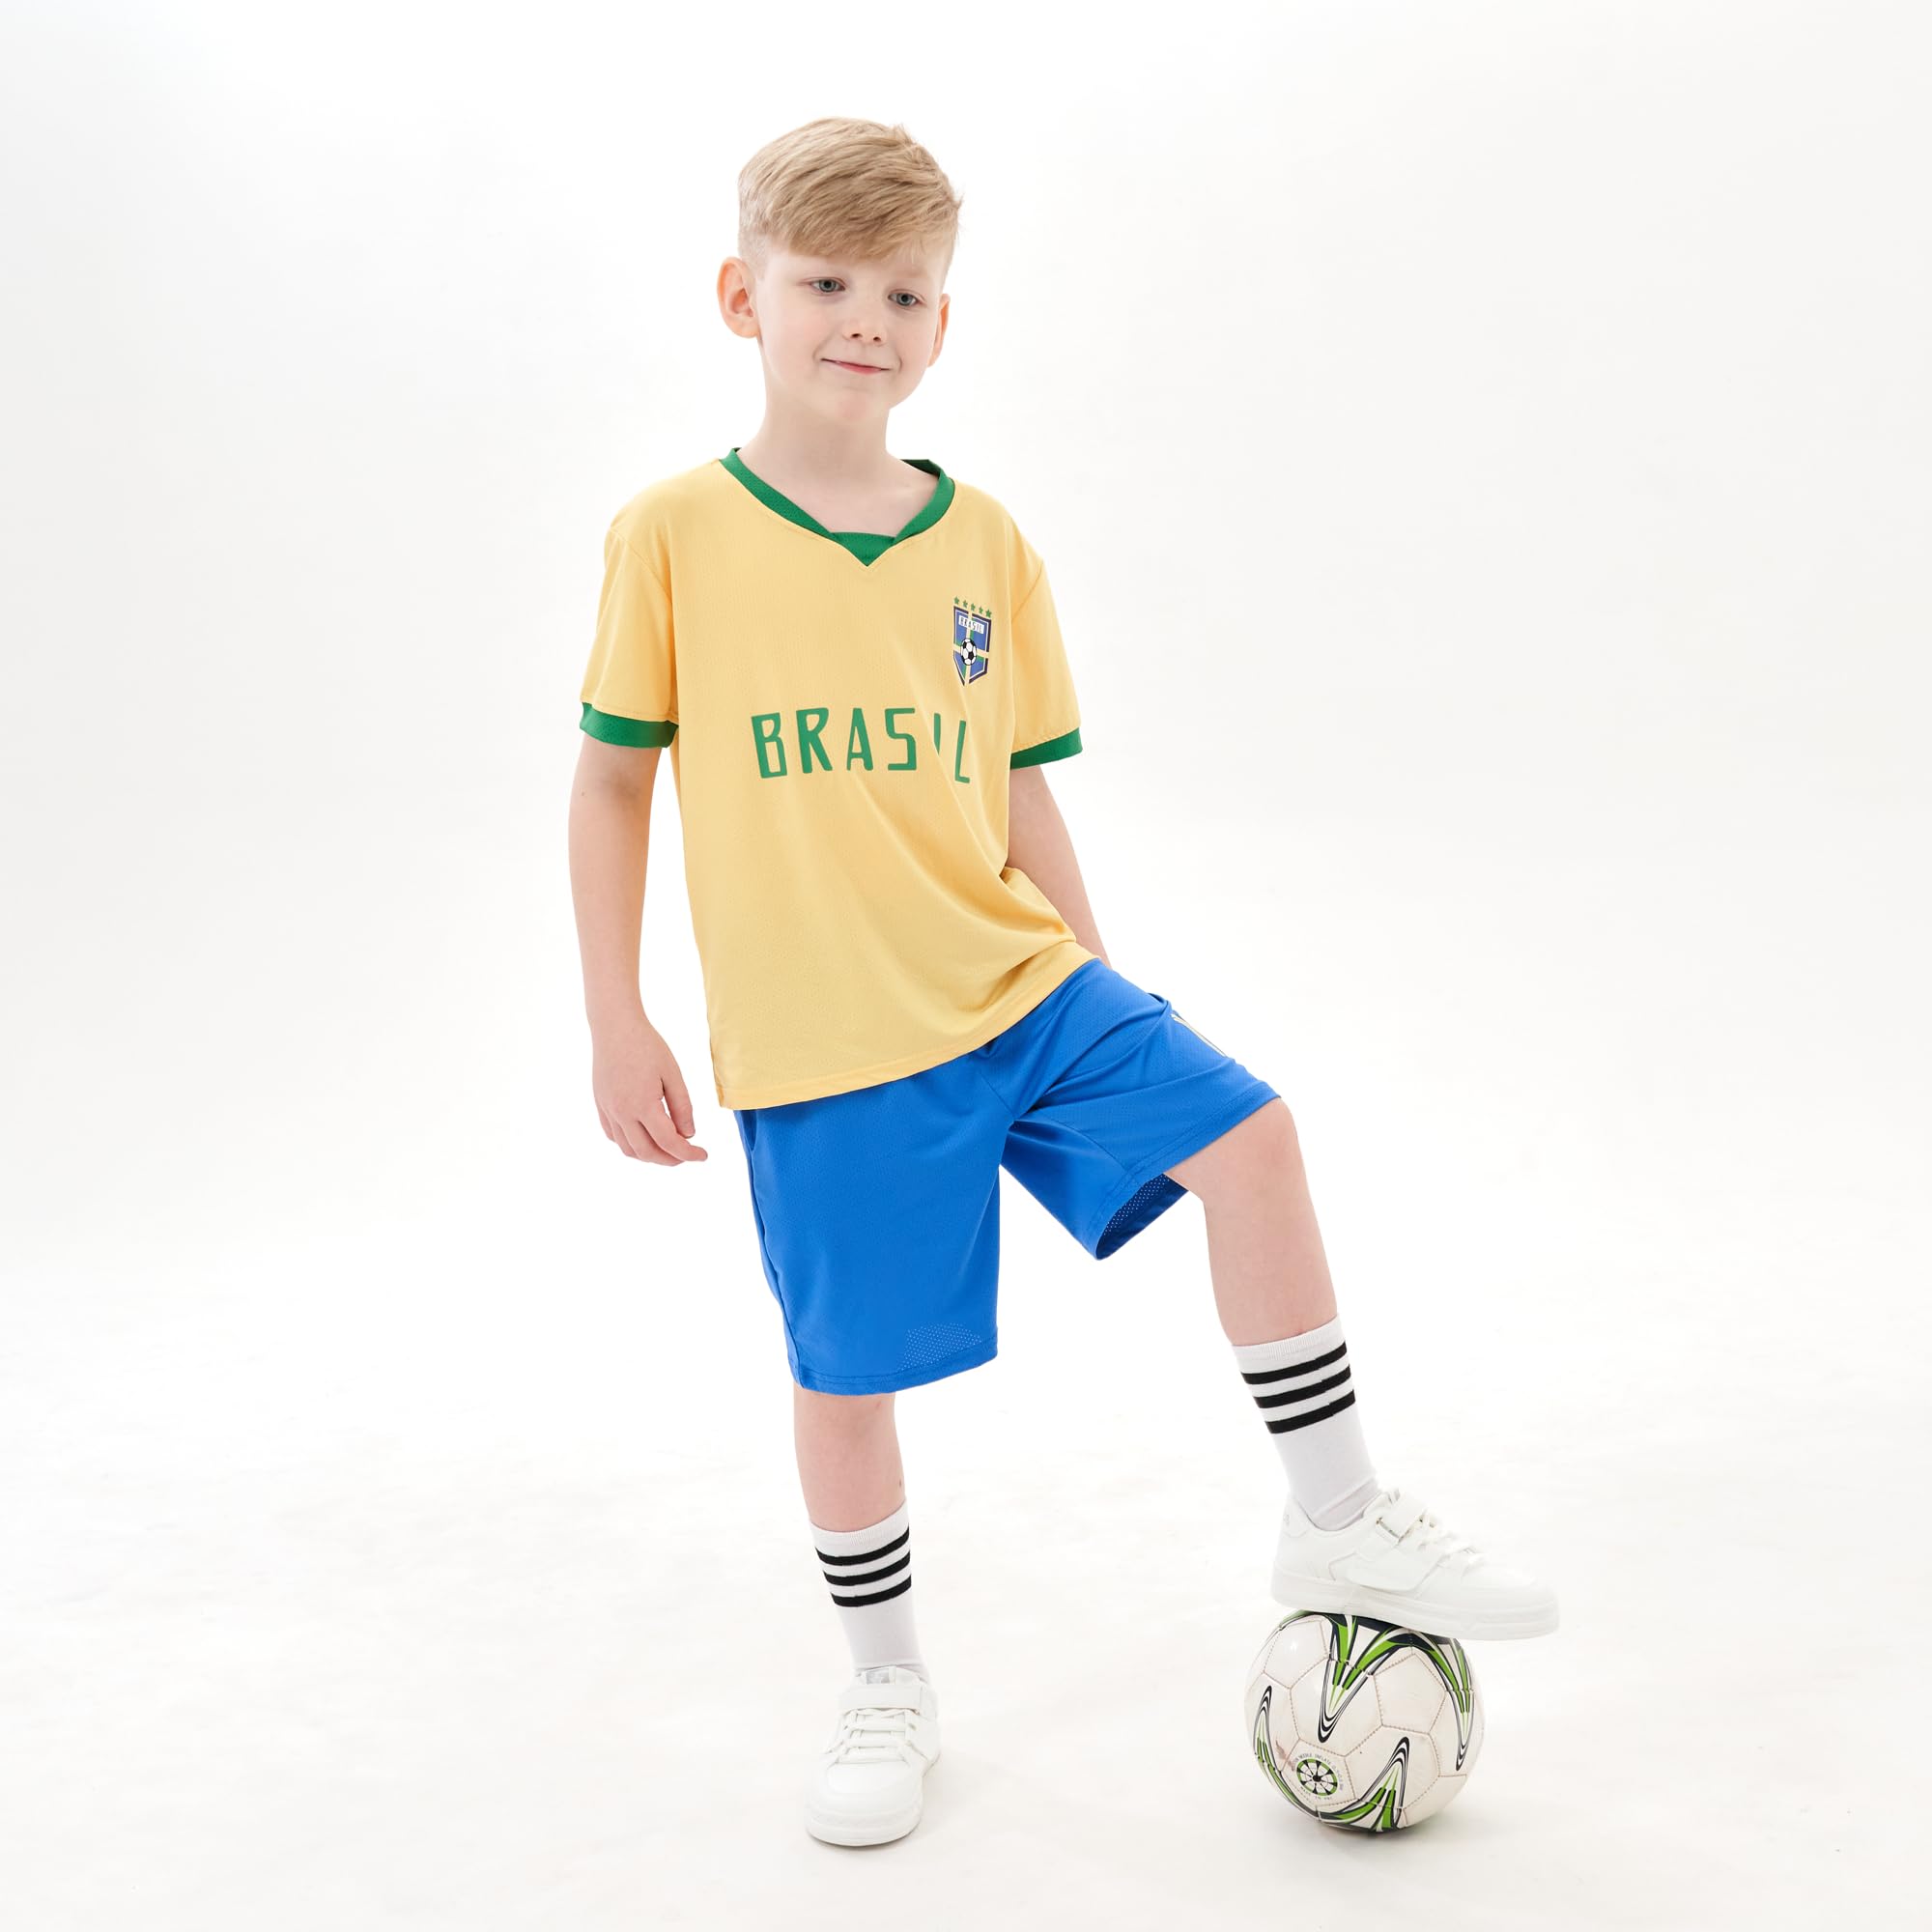 Unique Soccer Jerseys for Toddlers #10 Argentina 2T Soccer Football Outfit for Baby Infant Boys & Girls(AGT,2T)